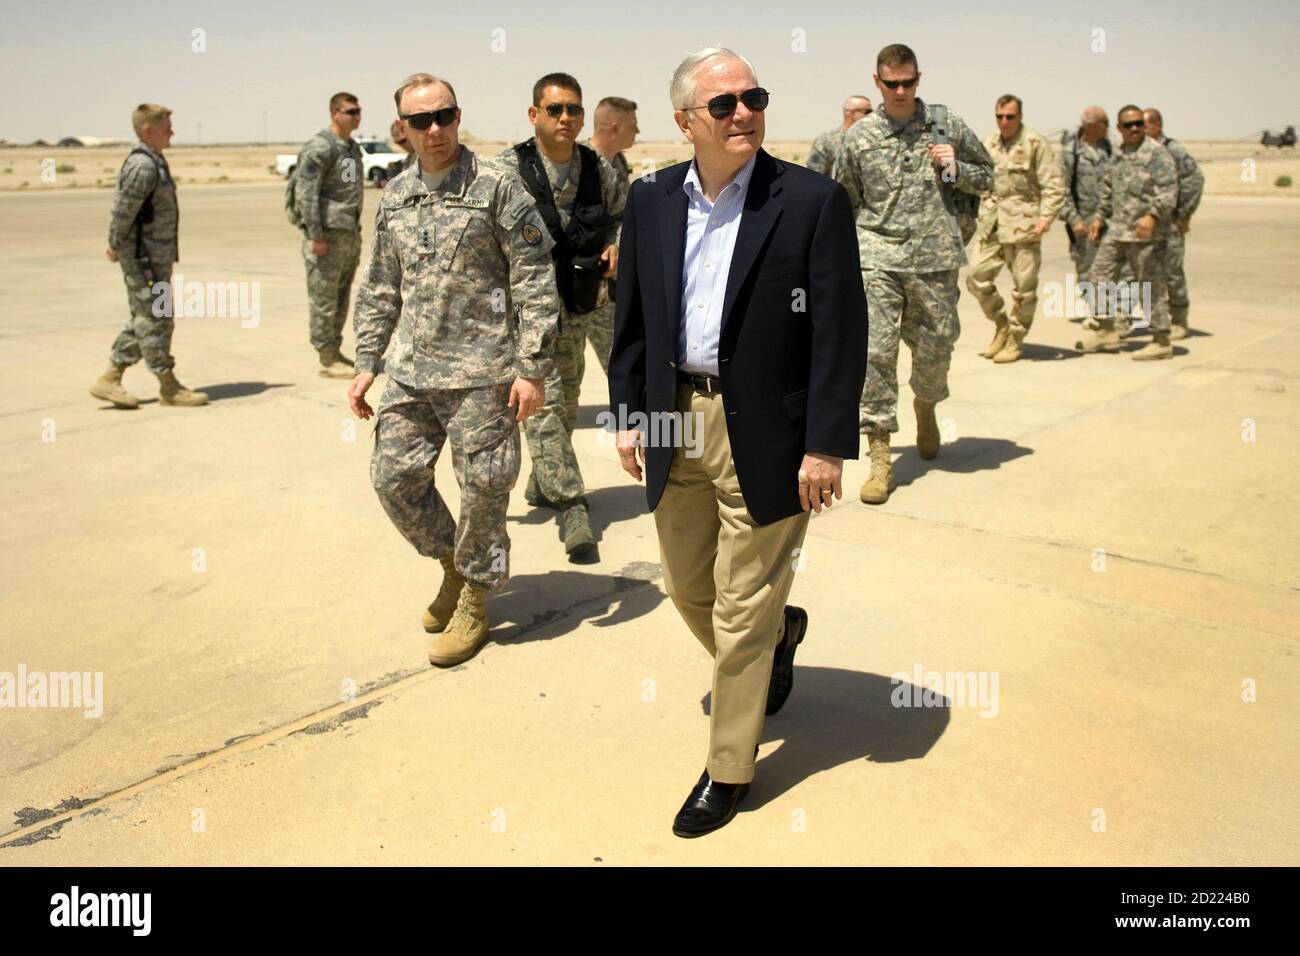 US Secretary of Defense Robert Gates (C) visits troops from the 4th Brigade, 1st Armored Division's Advise and Assist Mission upon his arrival at COB Adder in Tallil July 28, 2009. Gates, on a previously unannounced mission, urged Iraq's communities to settle political differences before US troops leave by the end of 2011.      REUTERS/Jim Watson/Pool      (IRAQ MILITARY POLITICS IMAGES OF THE DAY) Stock Photo